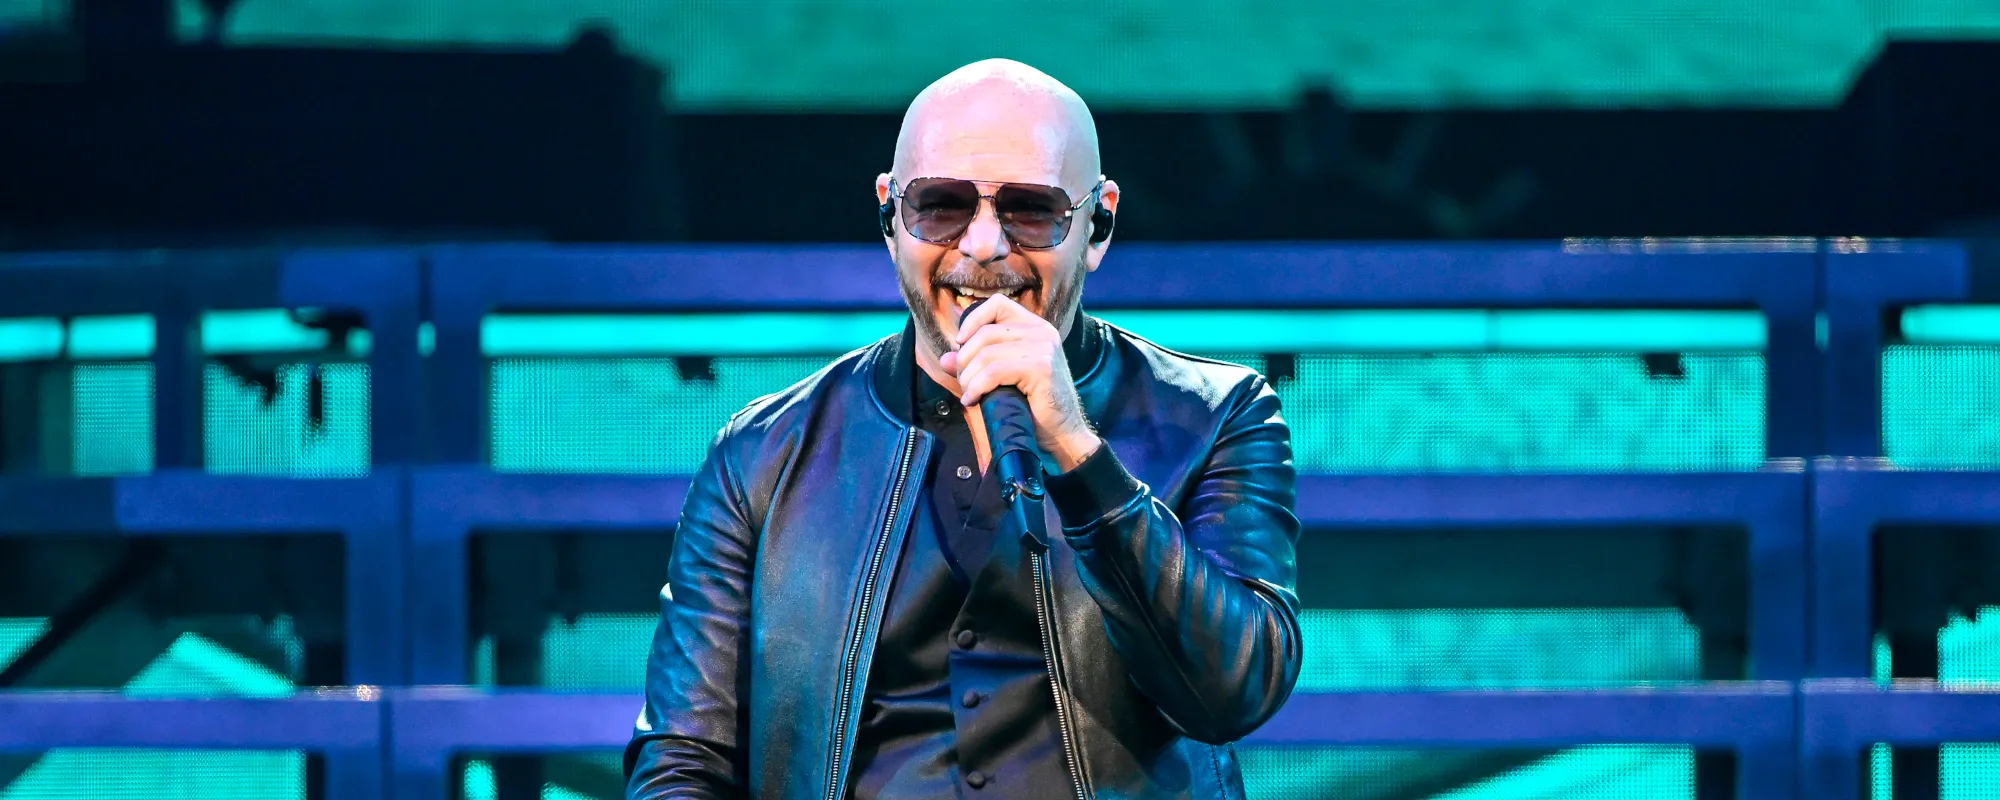 5 Songs You Didn’t Know Pitbull Wrote for Other Artists